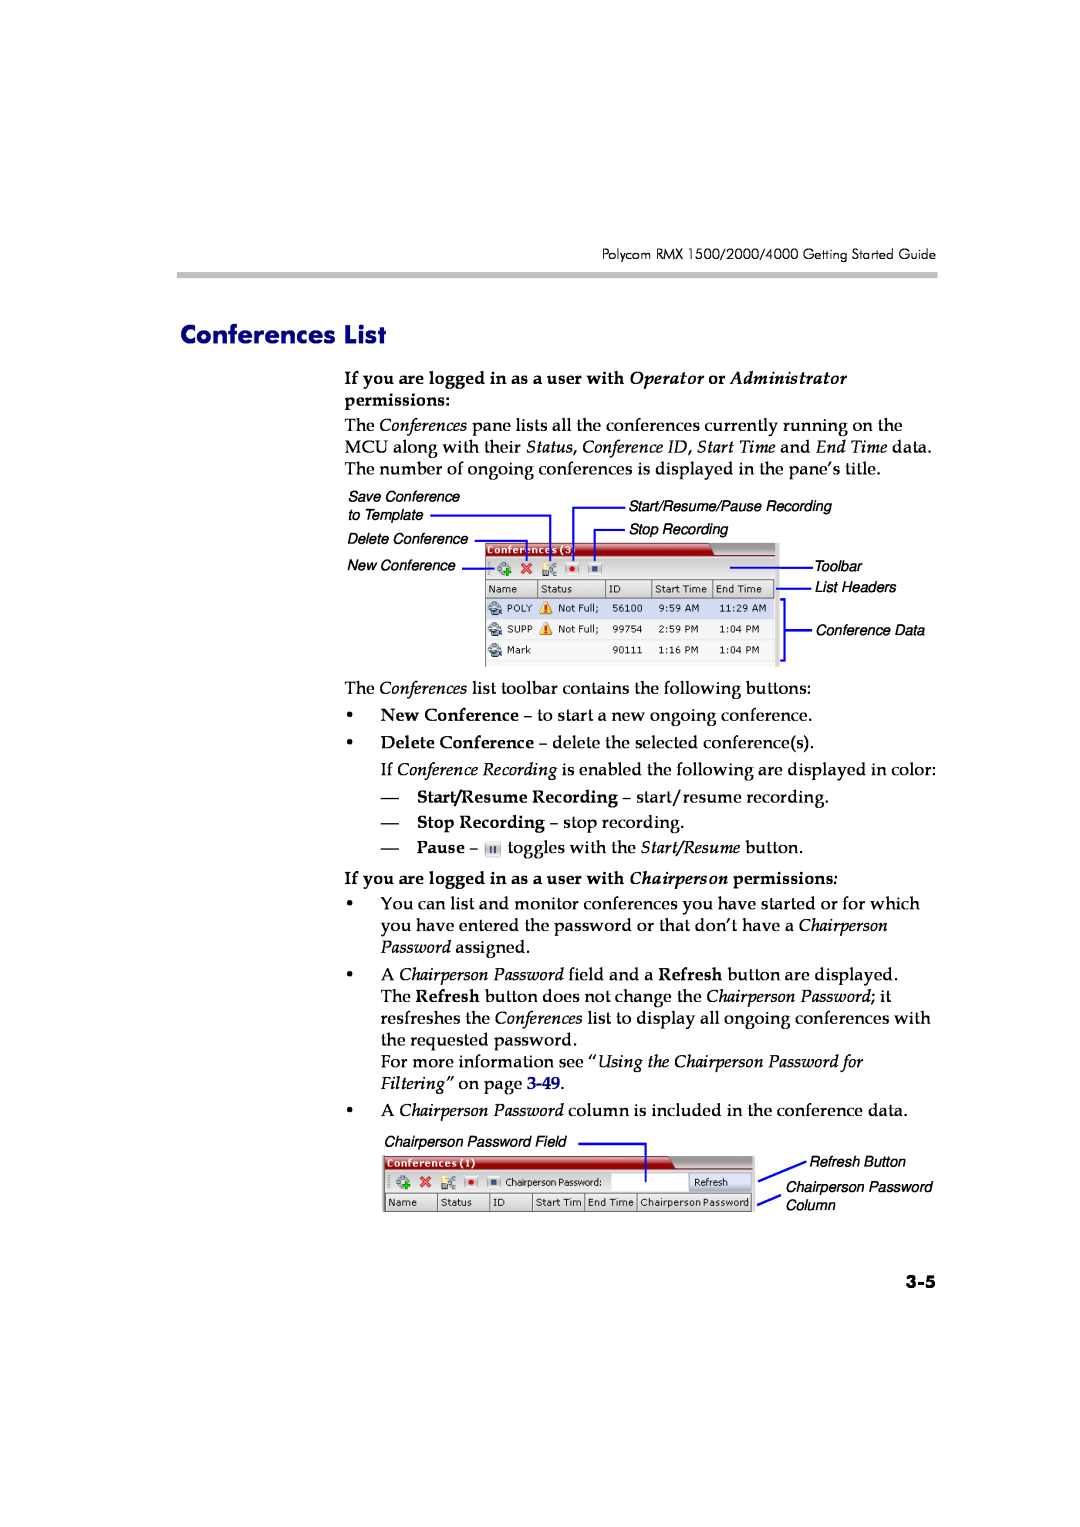 Polycom DOC2560A manual Conferences List, If you are logged in as a user with Chairperson permissions 